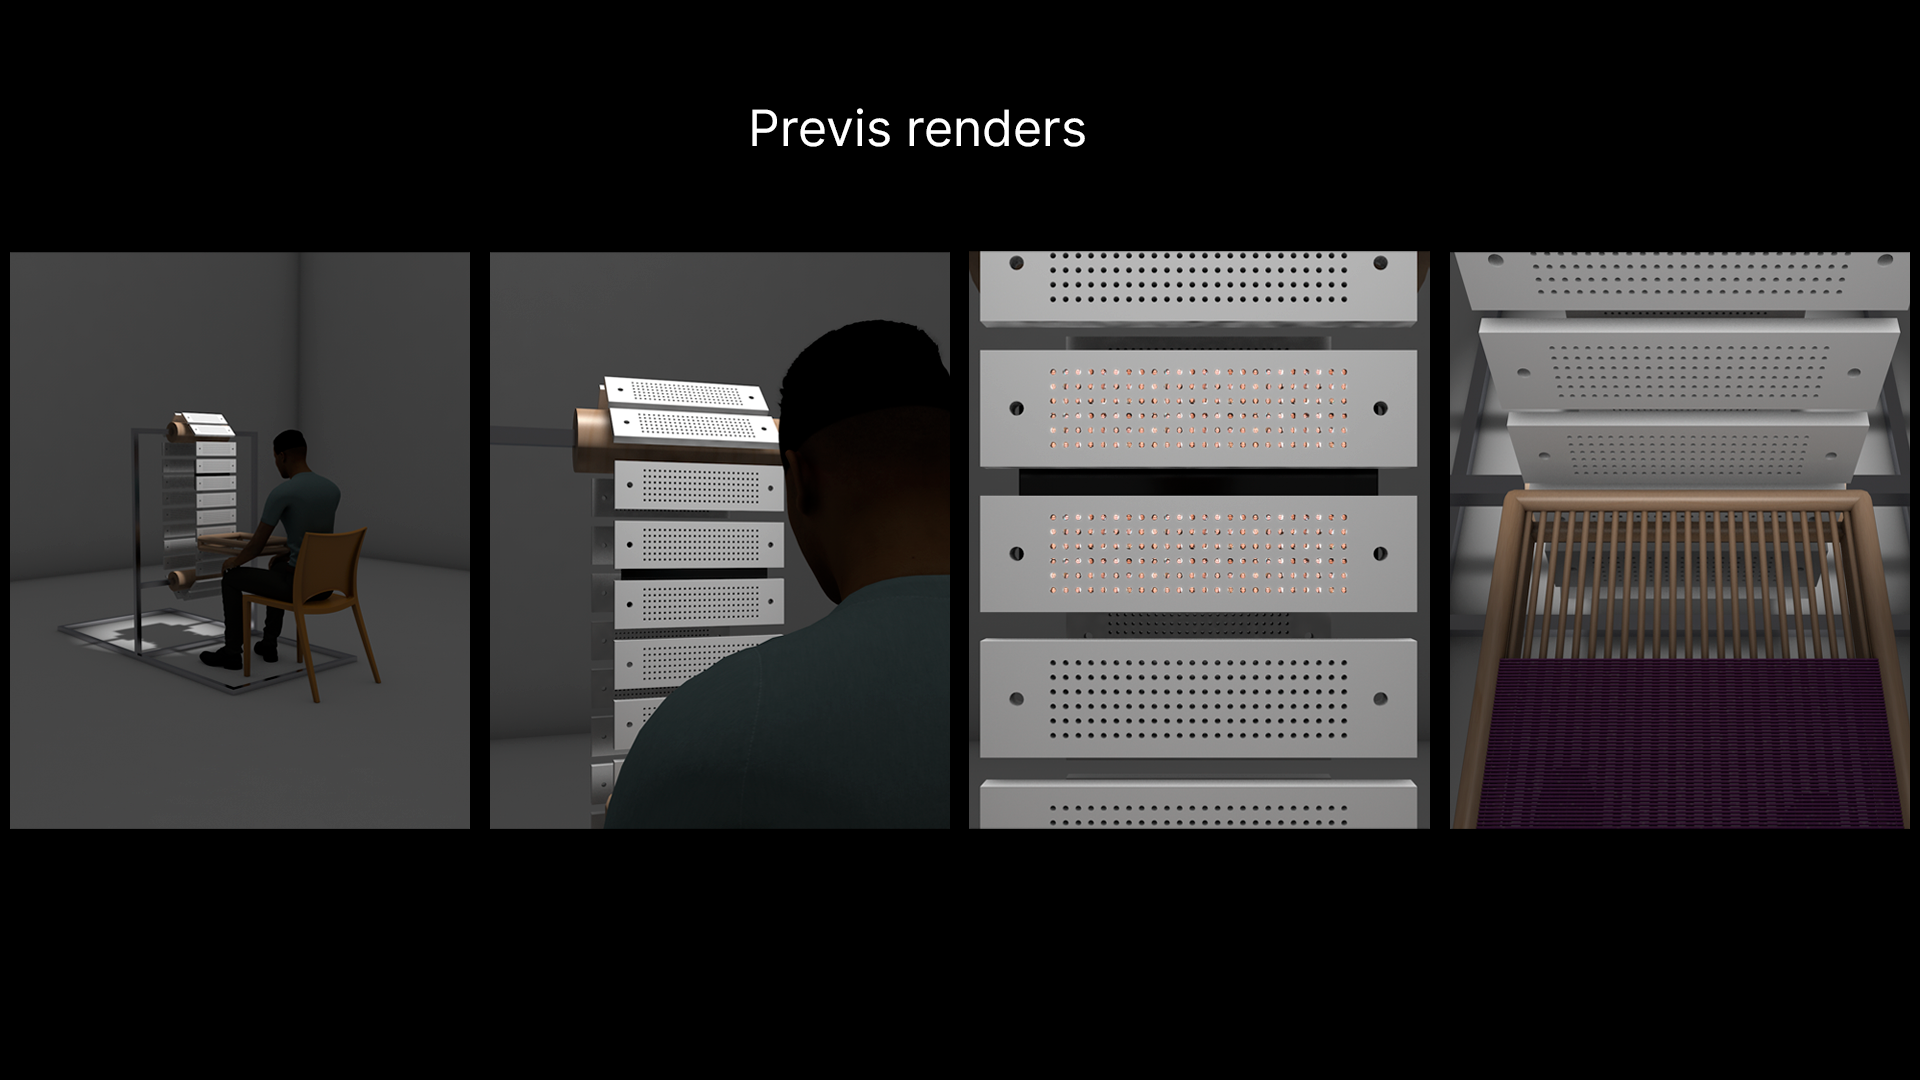 Image showing 4 3D renders showing the user flow. The first render is of the complete installation with a participant sitting in front of it. The second render is a close-up of the jacquard cards with the participant still on the right side of the frame. The third render is a close-up of just the cards with the holes having faces of other people. The fourth render is from the participant's point of view looking down at the loom, with the cards in the top half of the frame.